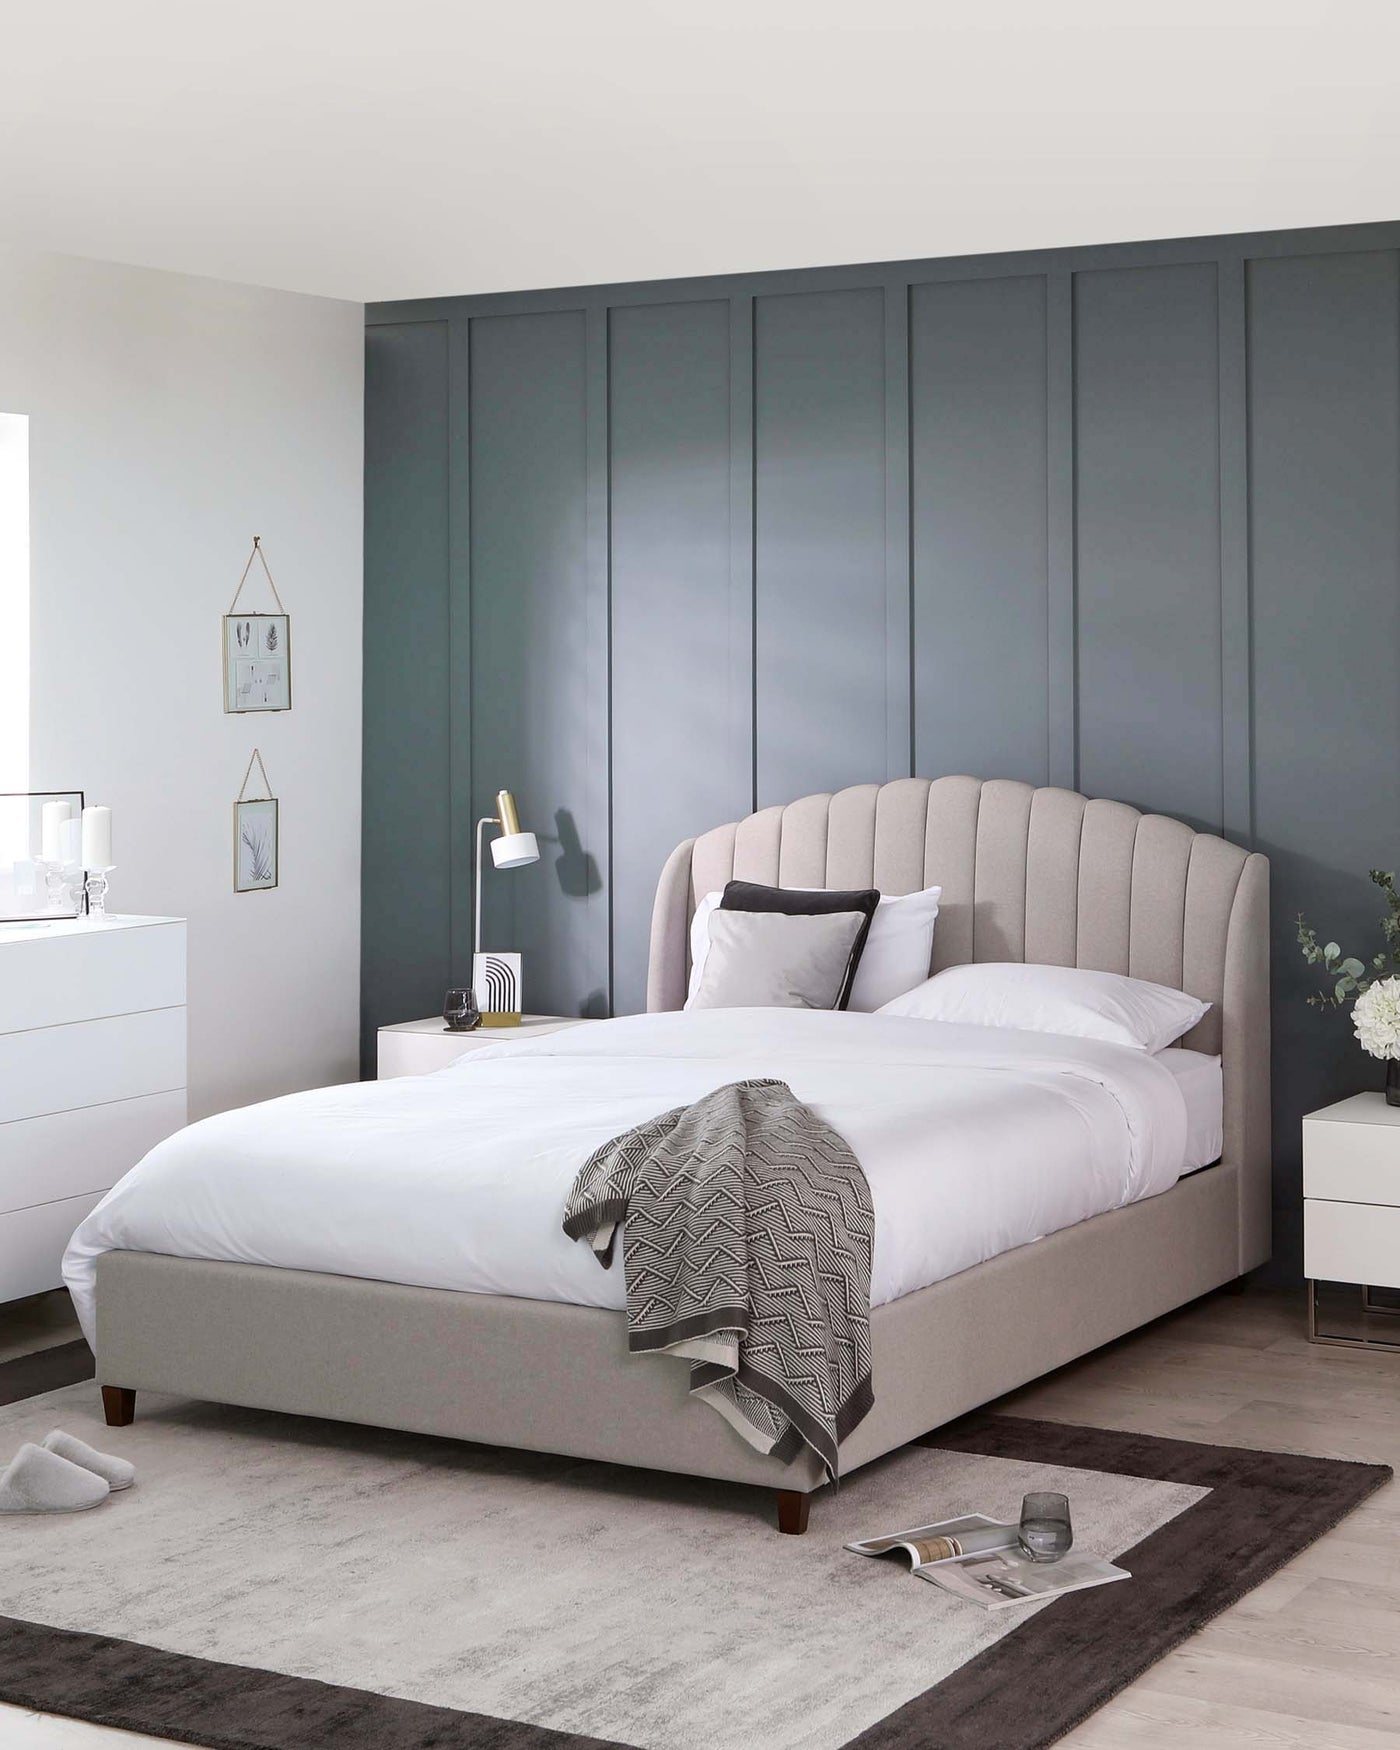 Elegant bedroom furniture set featuring a light grey upholstered bed with a curved, channel-tufted headboard and wooden feet, paired with a white two-drawer nightstand and a white six-drawer dresser. A grey area rug and tasteful room accessories complete the contemporary look.